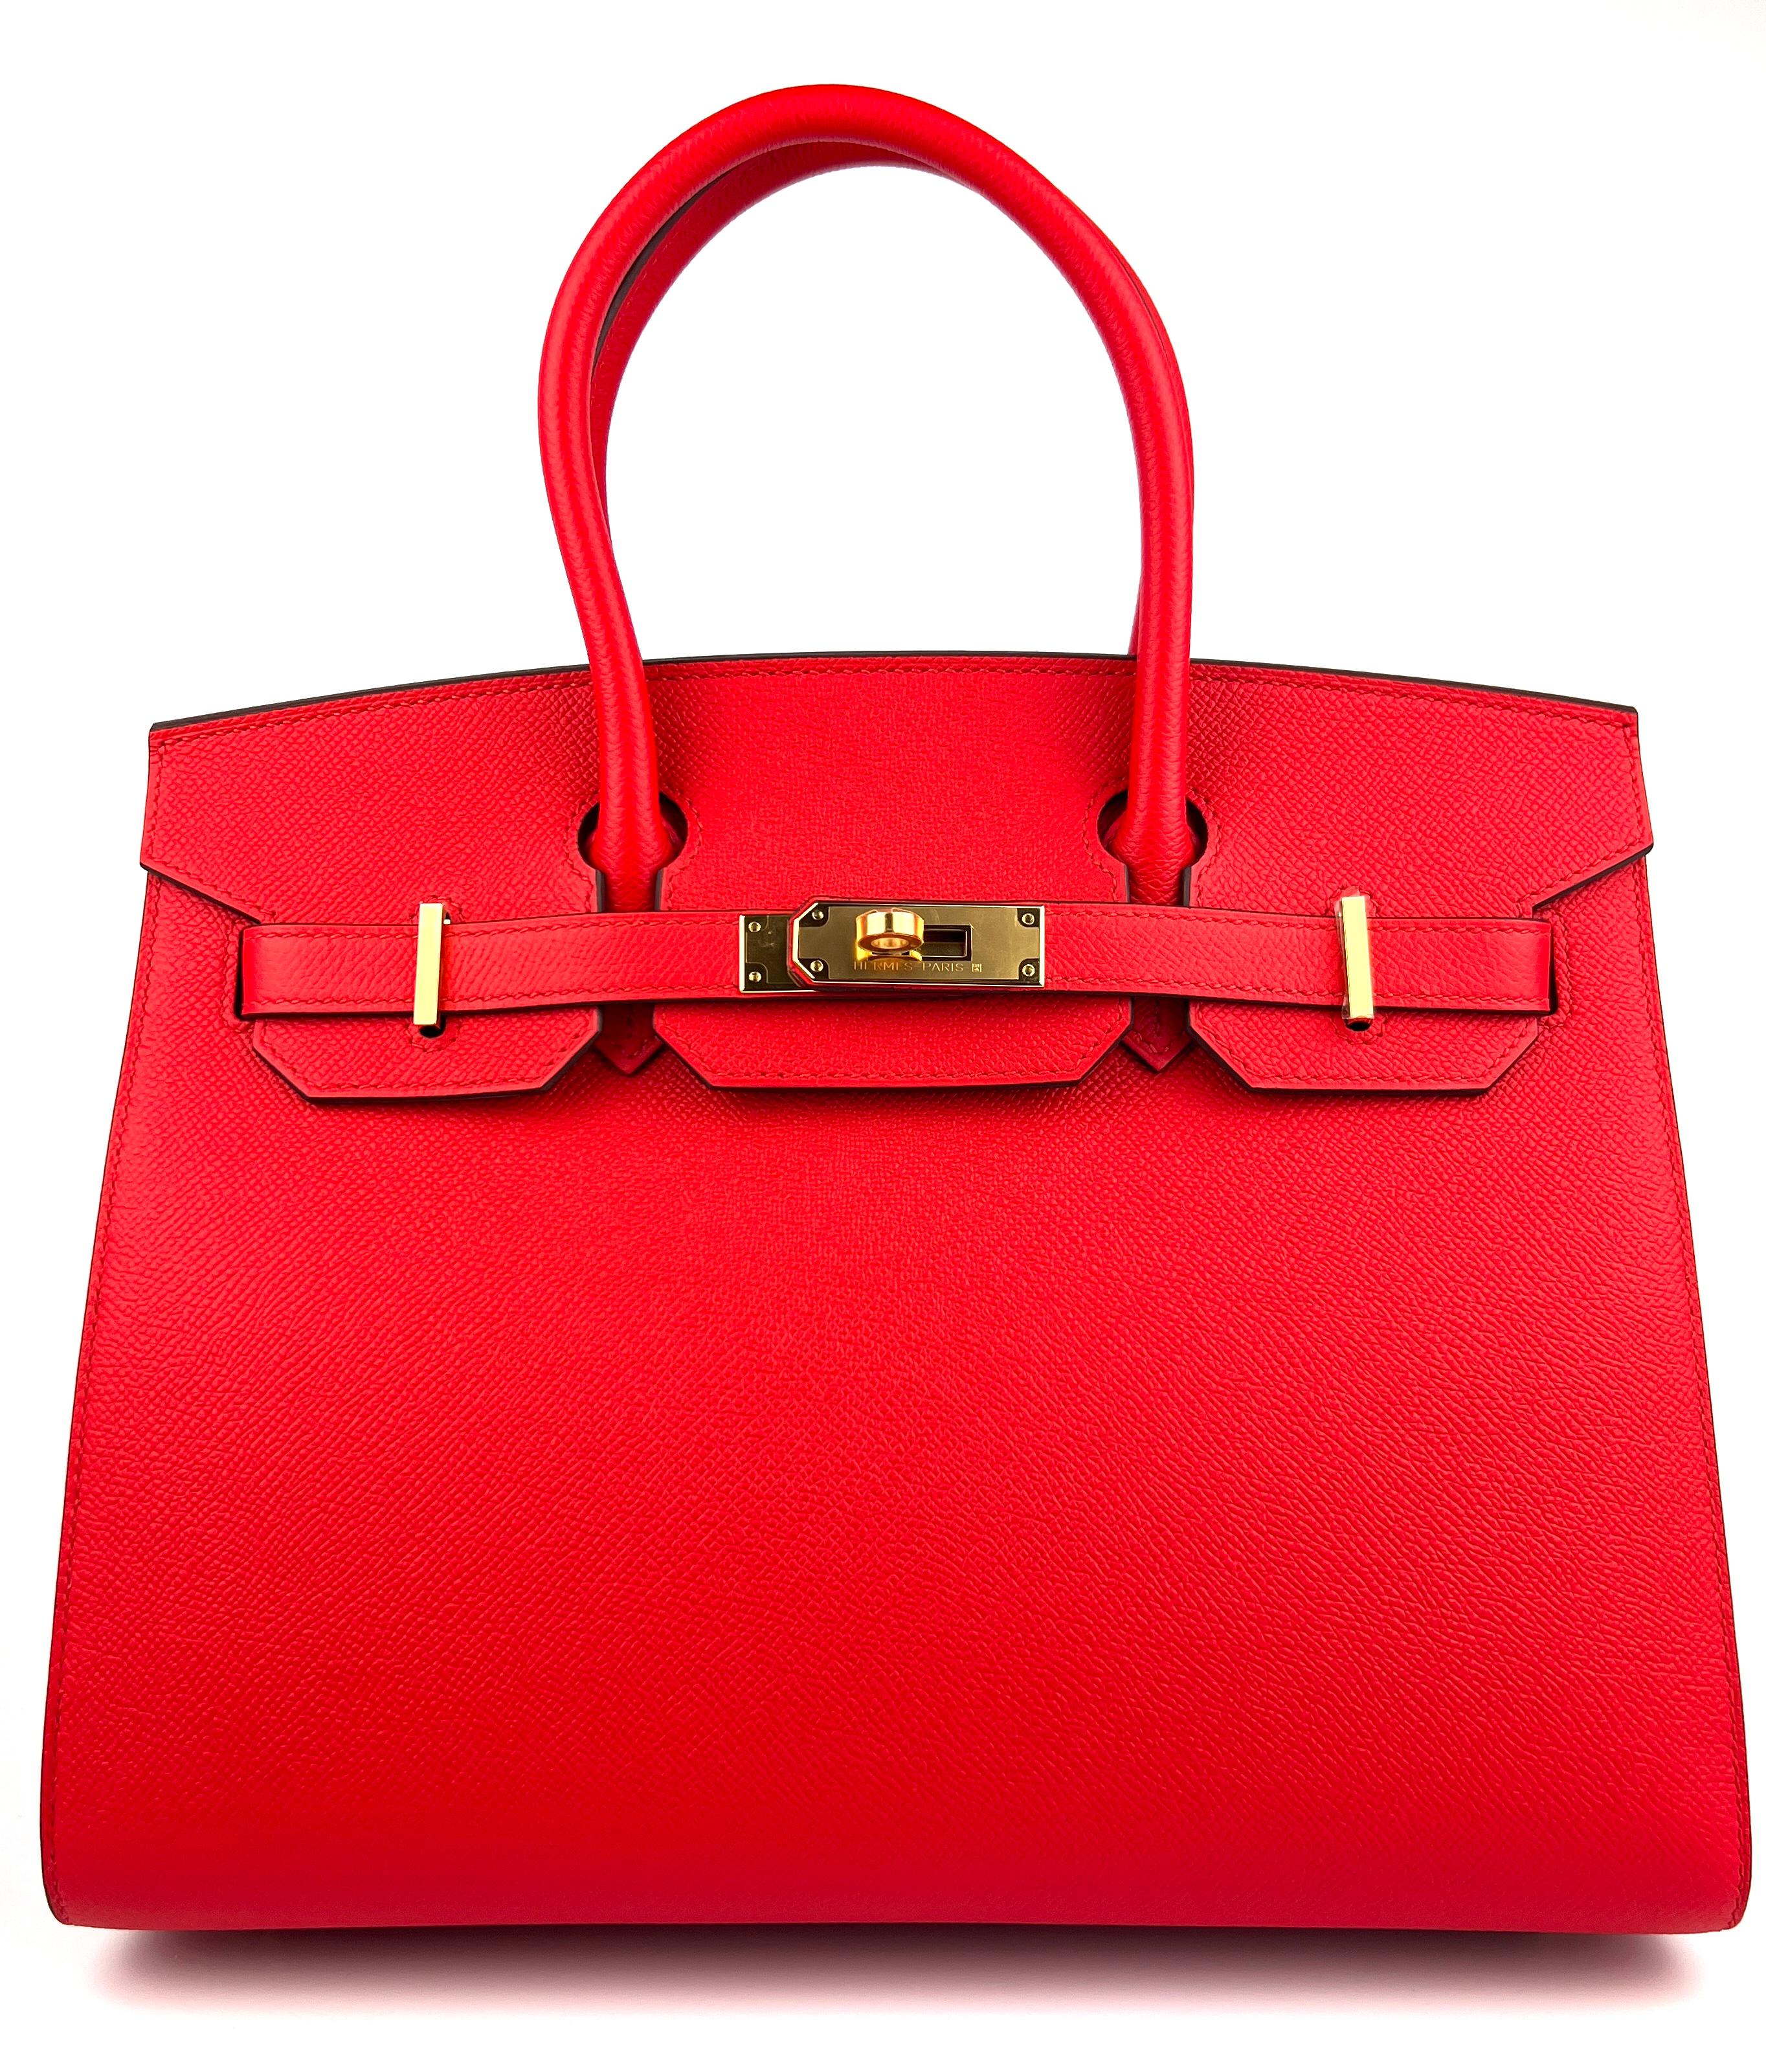 New Absolutely Stunning Rare Limited Edition Hermes Birkin 30 Sellier Rouge de Coeur Epsom Leather.Complimented by Epsom Leather and Palladium Hardware. Y Stamp 2020. 

Shop with Confidence from Lux Addicts. Authenticity Guaranteed! 

Lux Addicts is